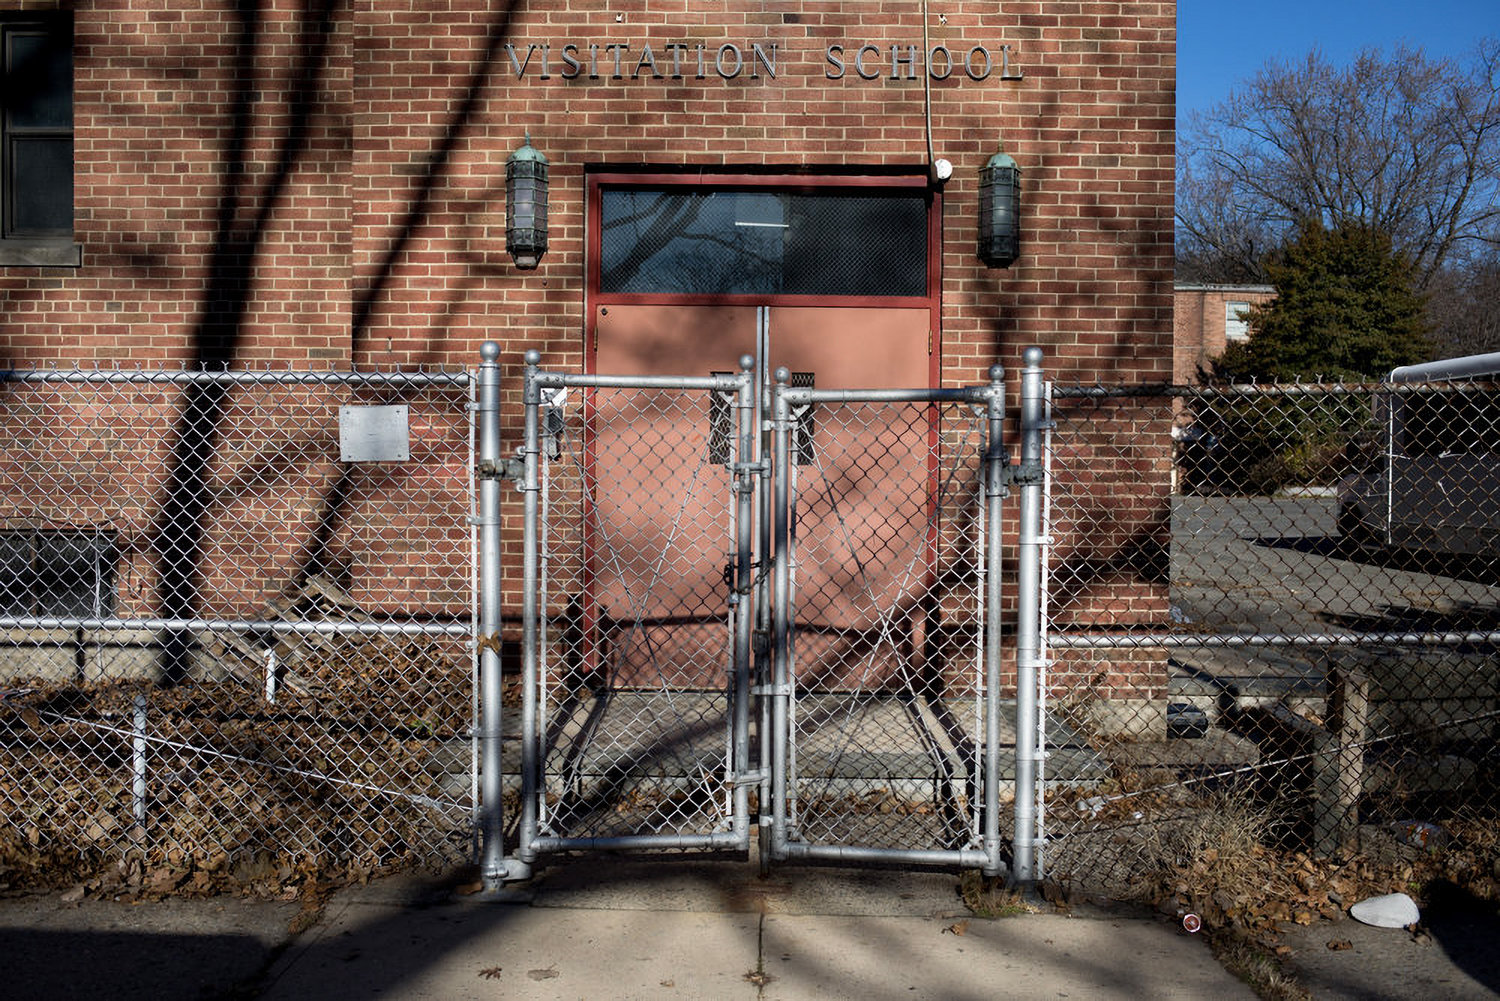 The parochial school attached to the Church of the Visitation School, located 171 W. 239th St., served the area for 85 years before closing its doors for good in 2017. The School Construction Authority now plans to build an elementary school on a half-acre subdivision overlapping with the former church’s parking lot.